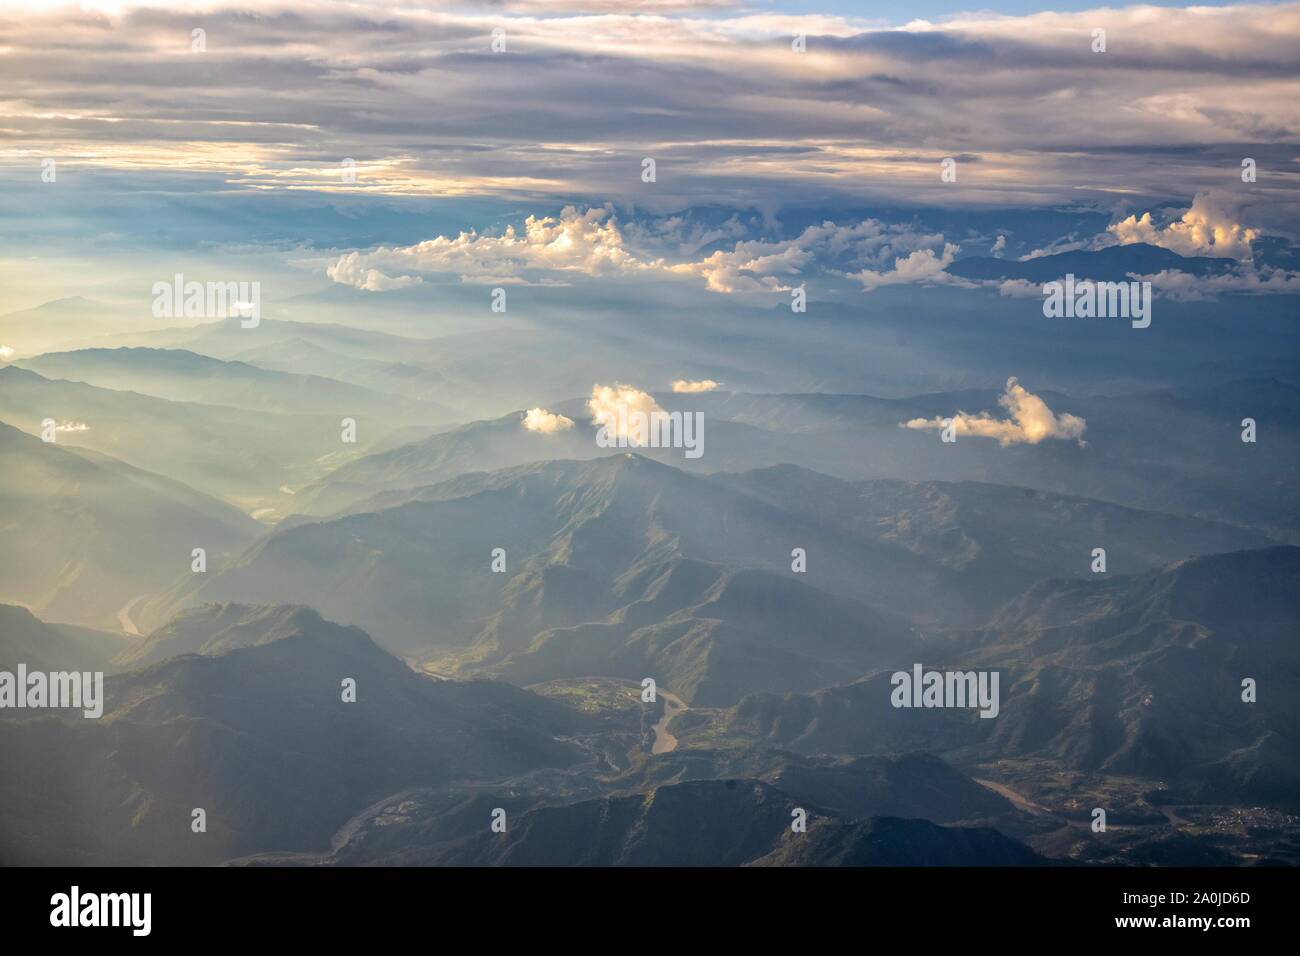 Hills and mountains in Nepal as seen from an airplane Stock Photo